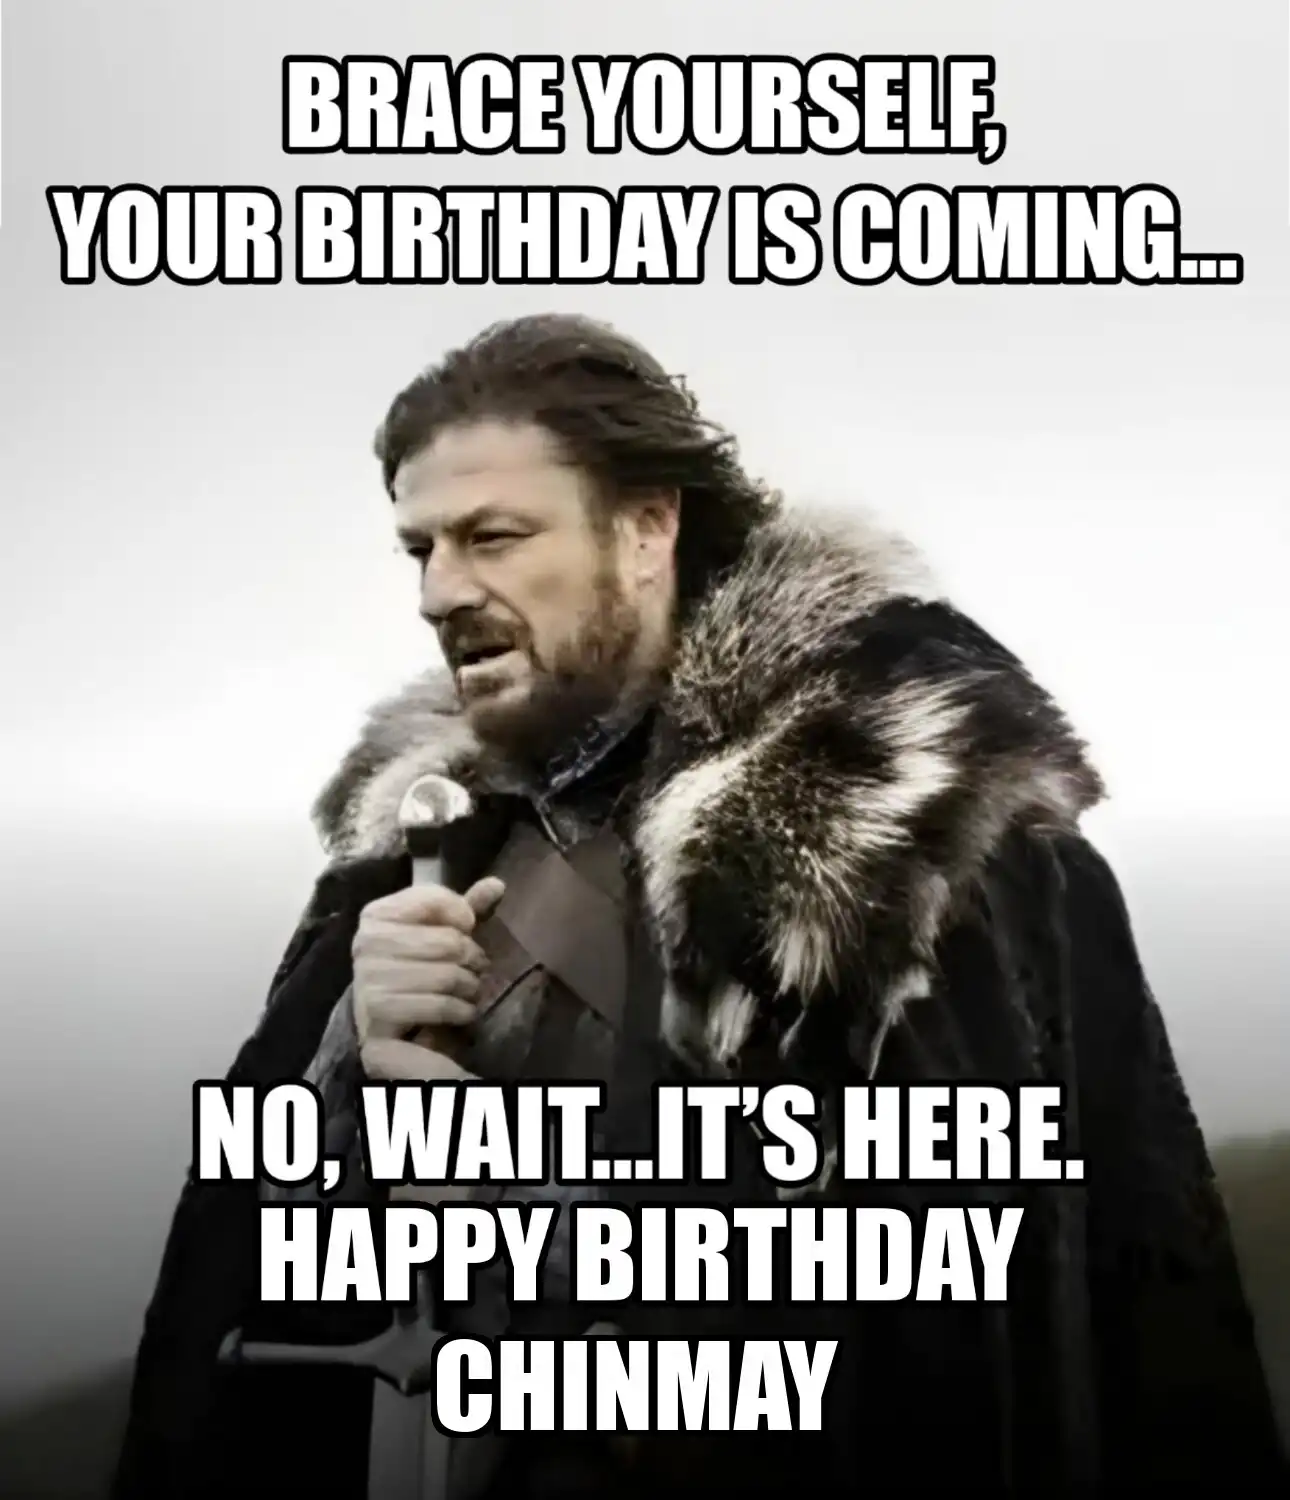 Happy Birthday Chinmay Brace Yourself Your Birthday Is Coming Meme